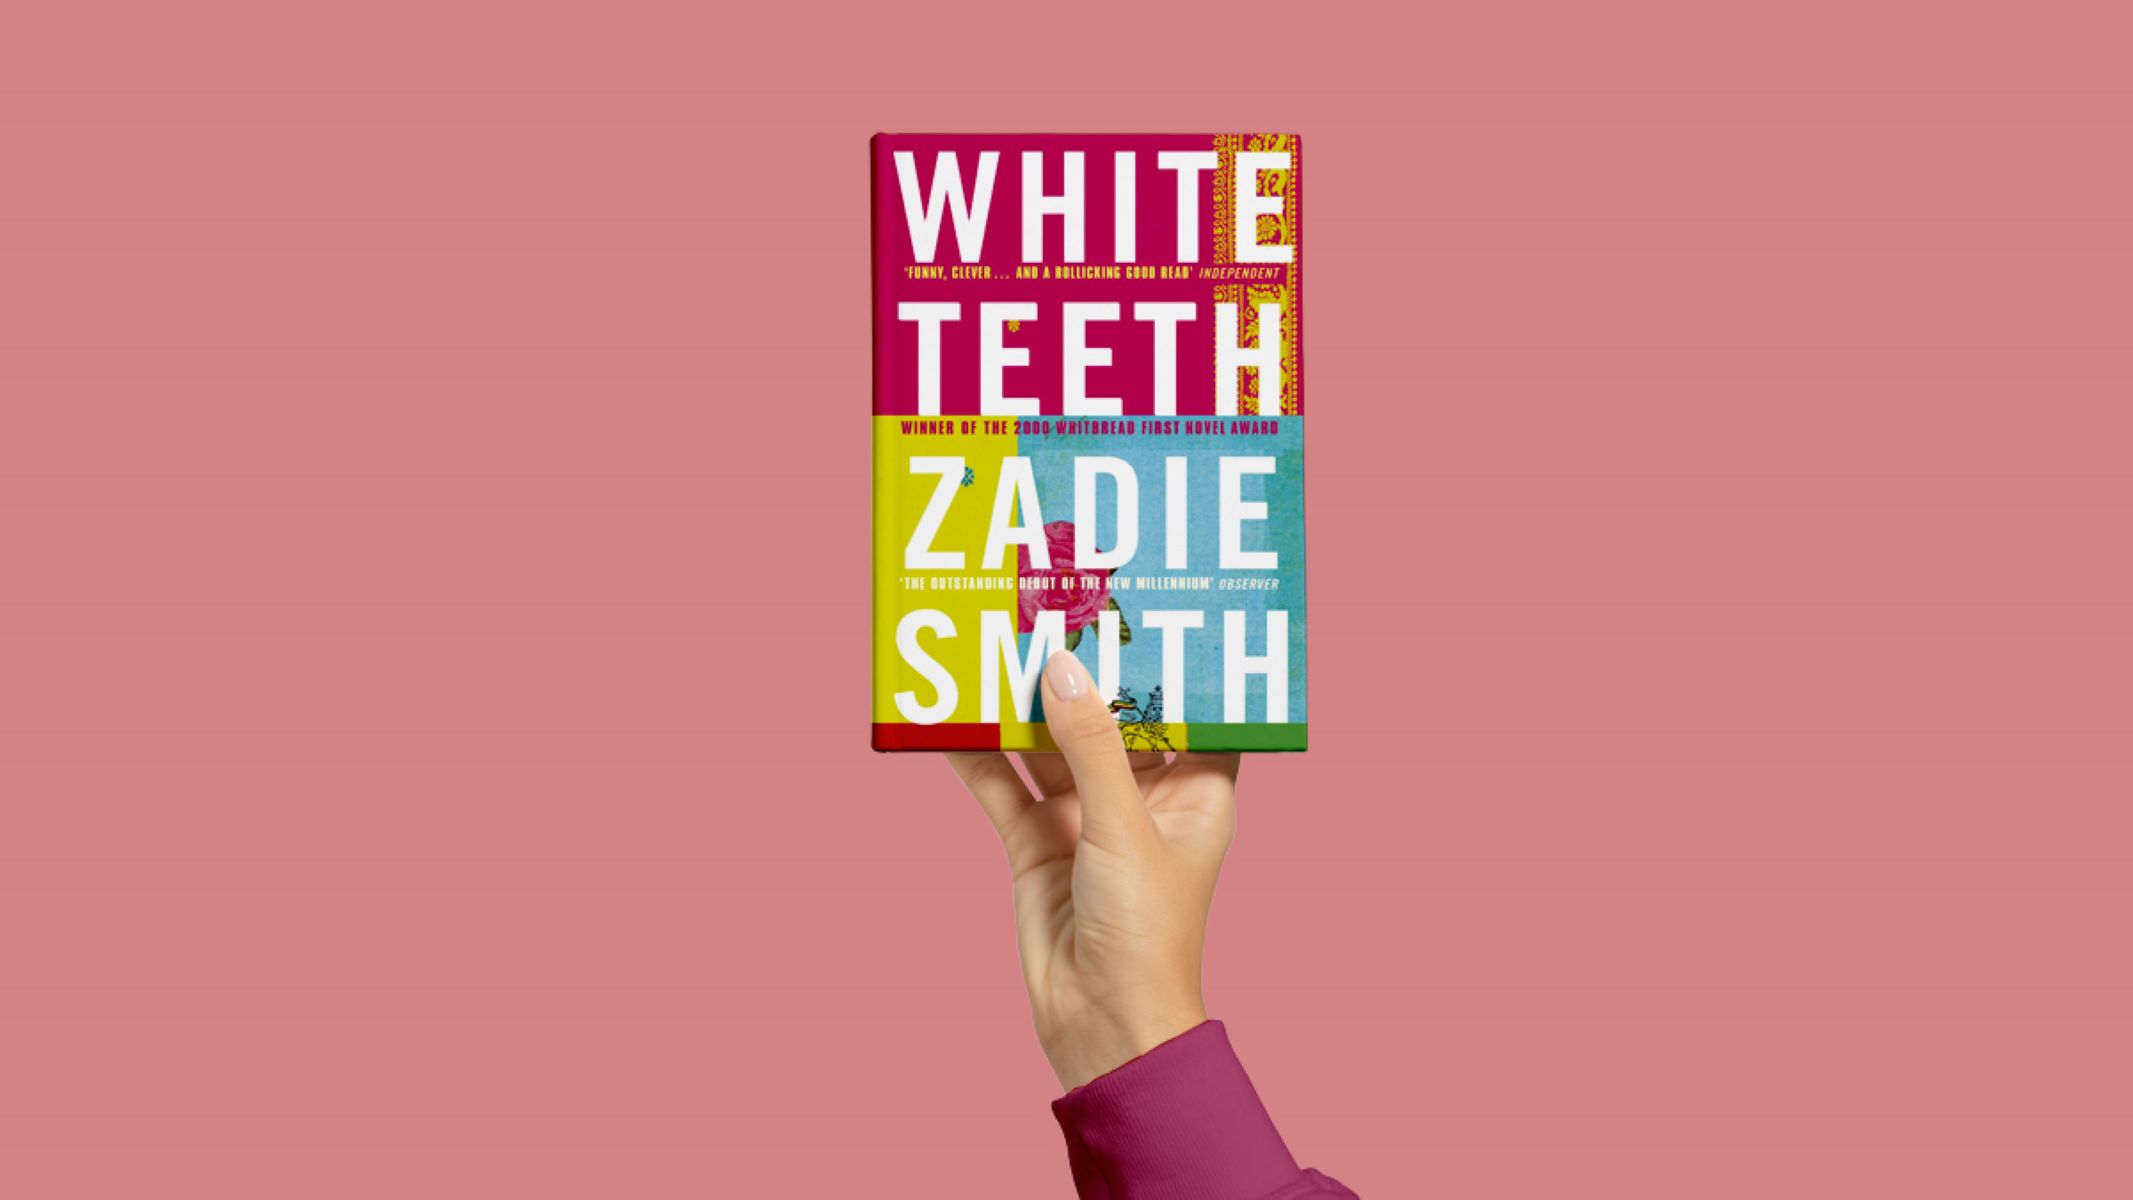 9-captivating-facts-about-white-teeth-zadie-smith